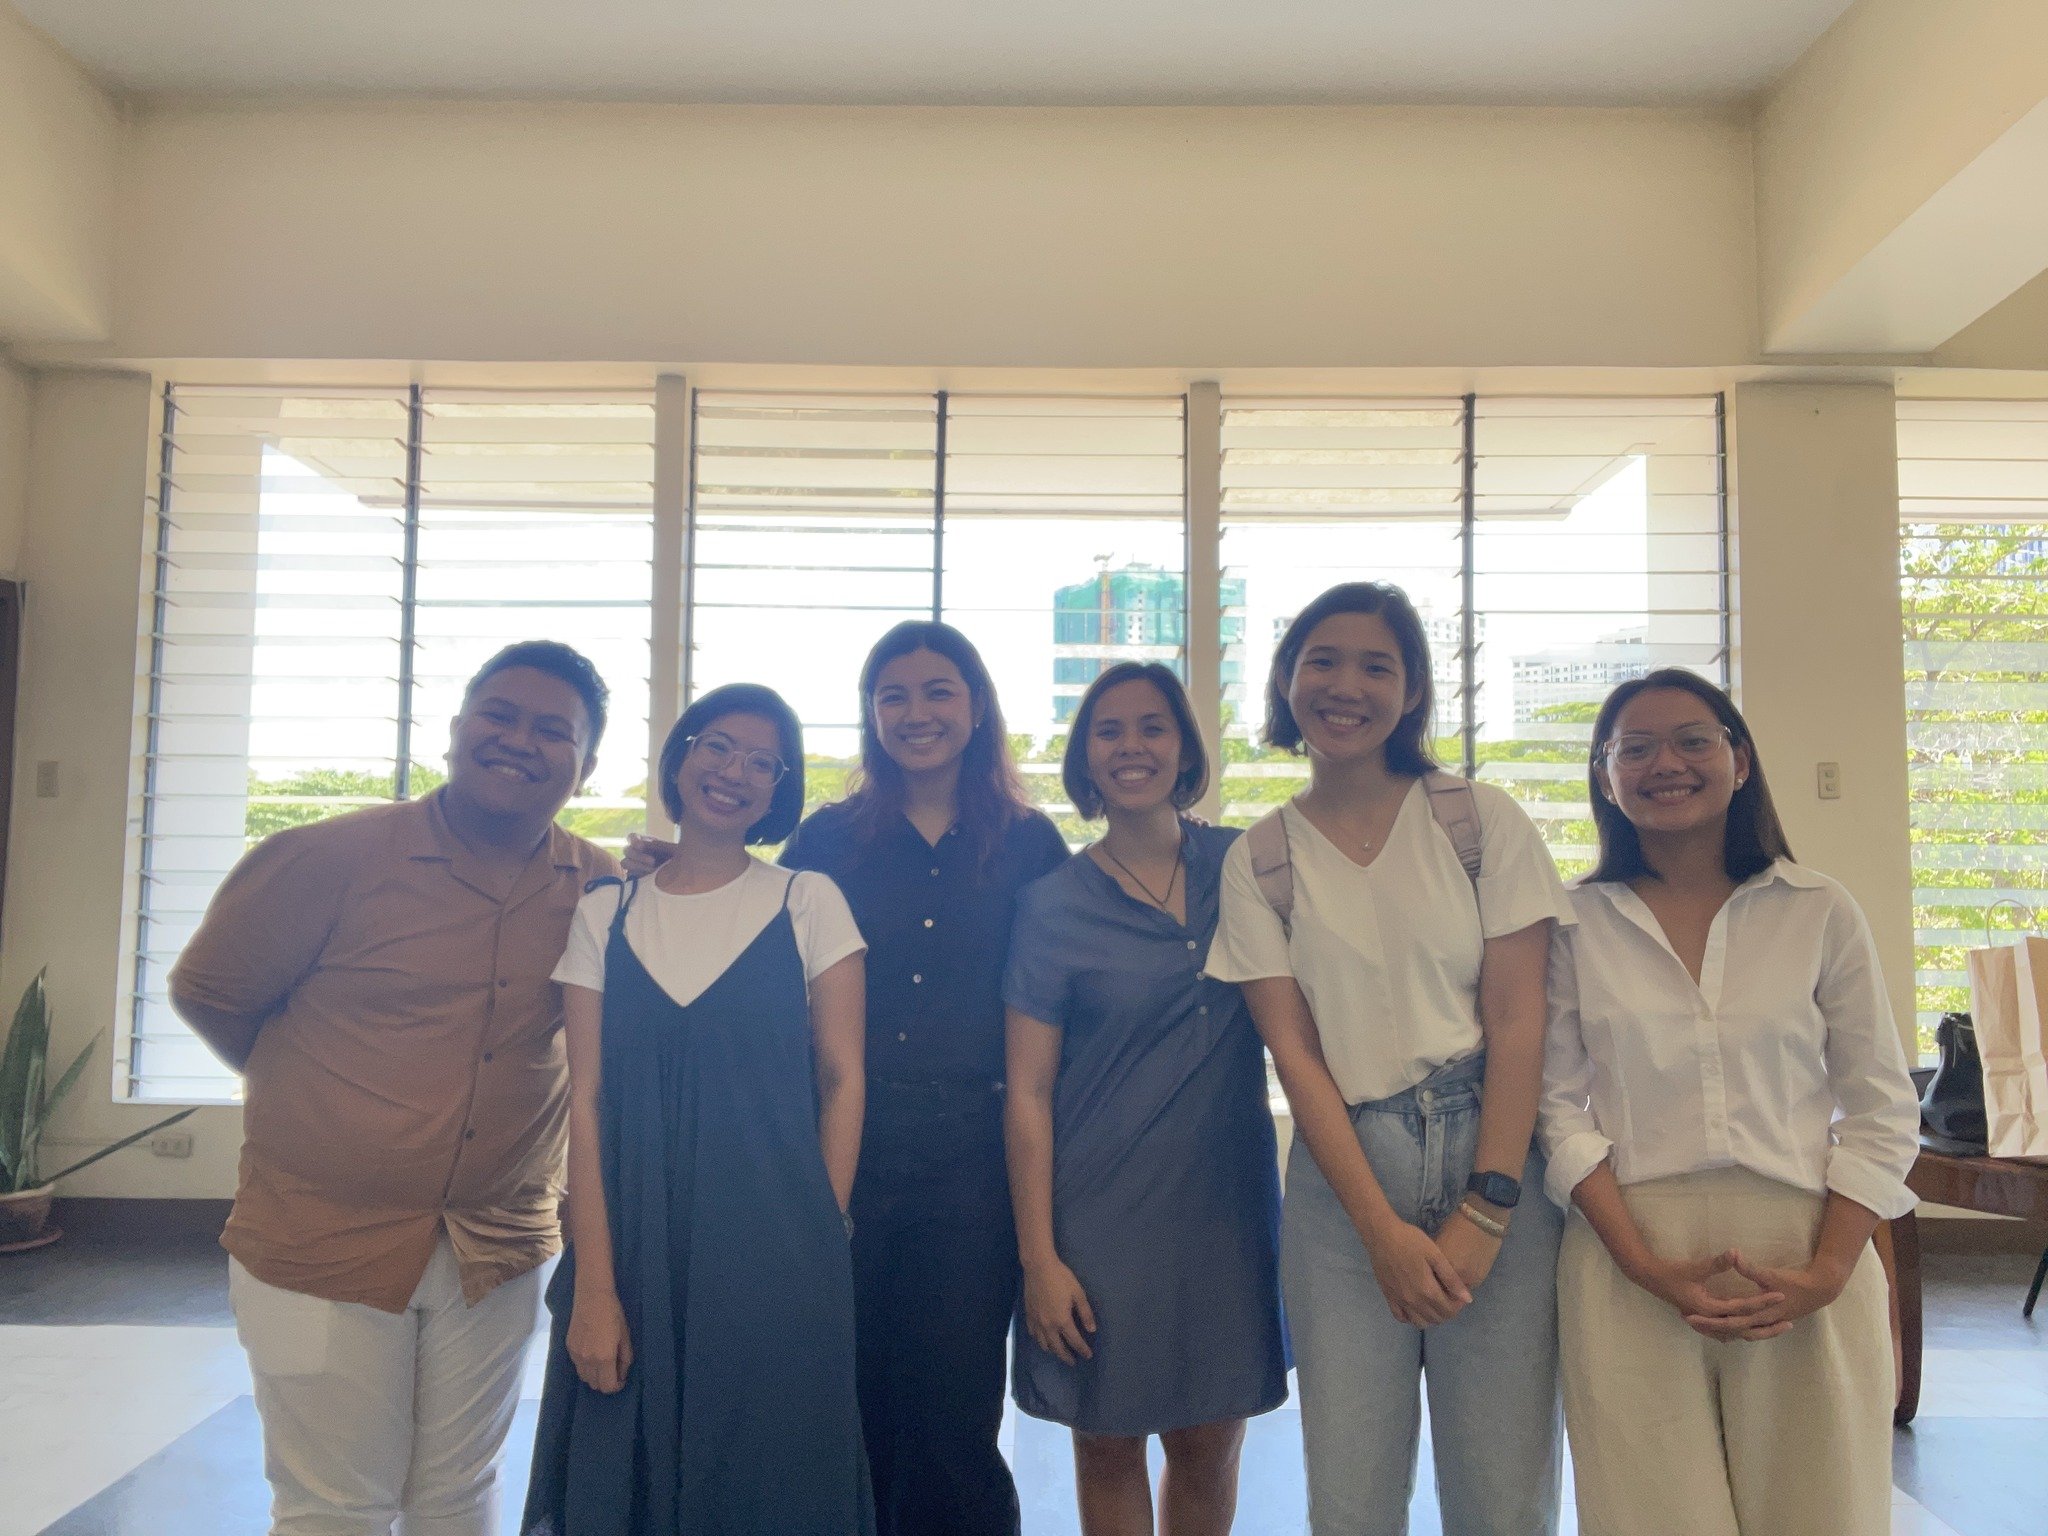 It was a productive two days for the Parabukas team!💚💙

We spent the last two days reflecting on year 2023, and strategizing for the exciting year ahead. We're very excited for all the projects we have and all the people we will get to work with.

